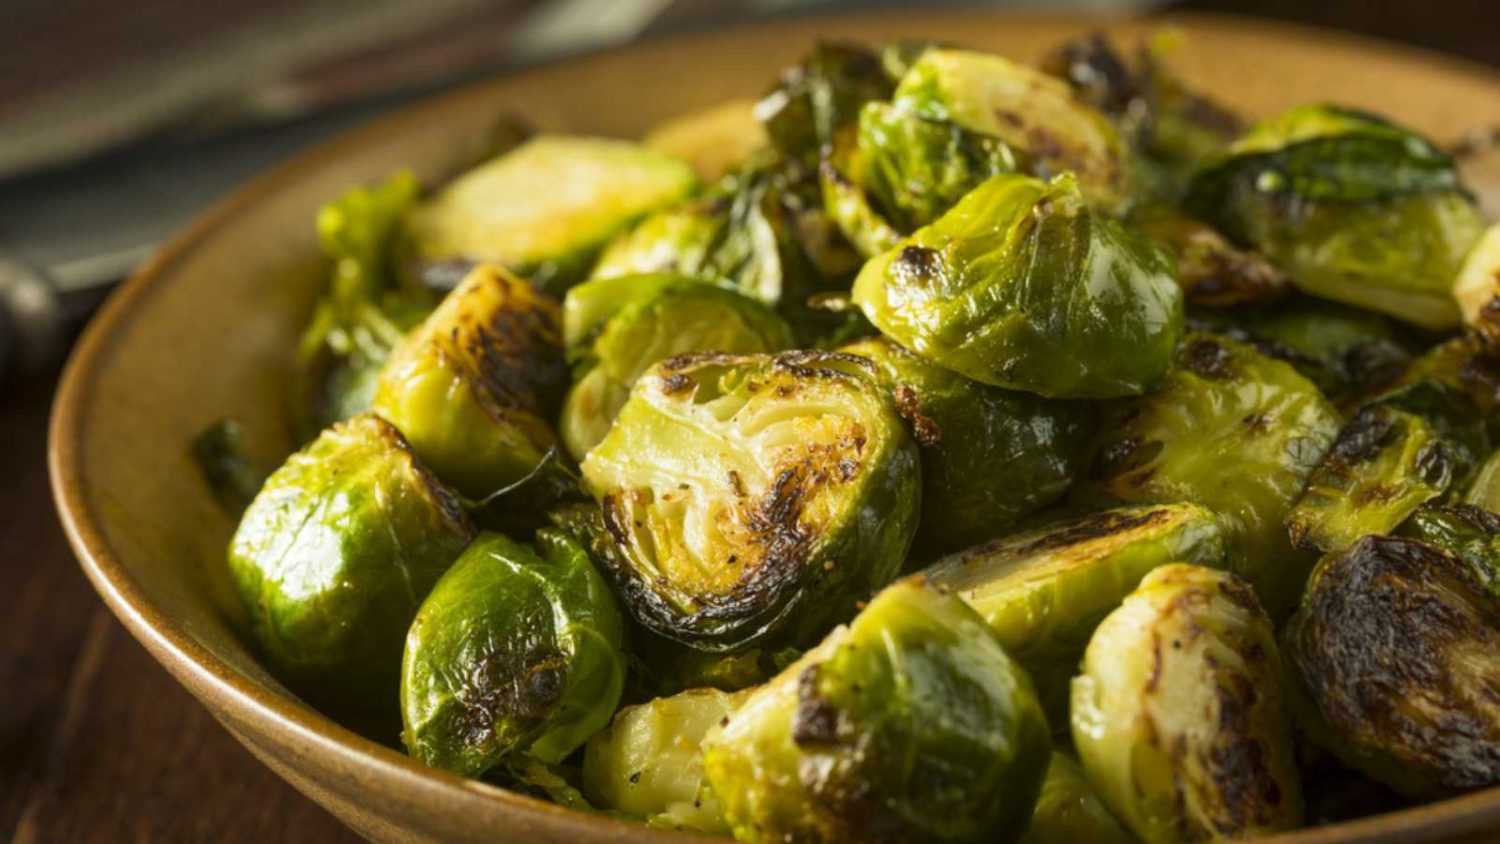 Big pieces of brussel sprouts.